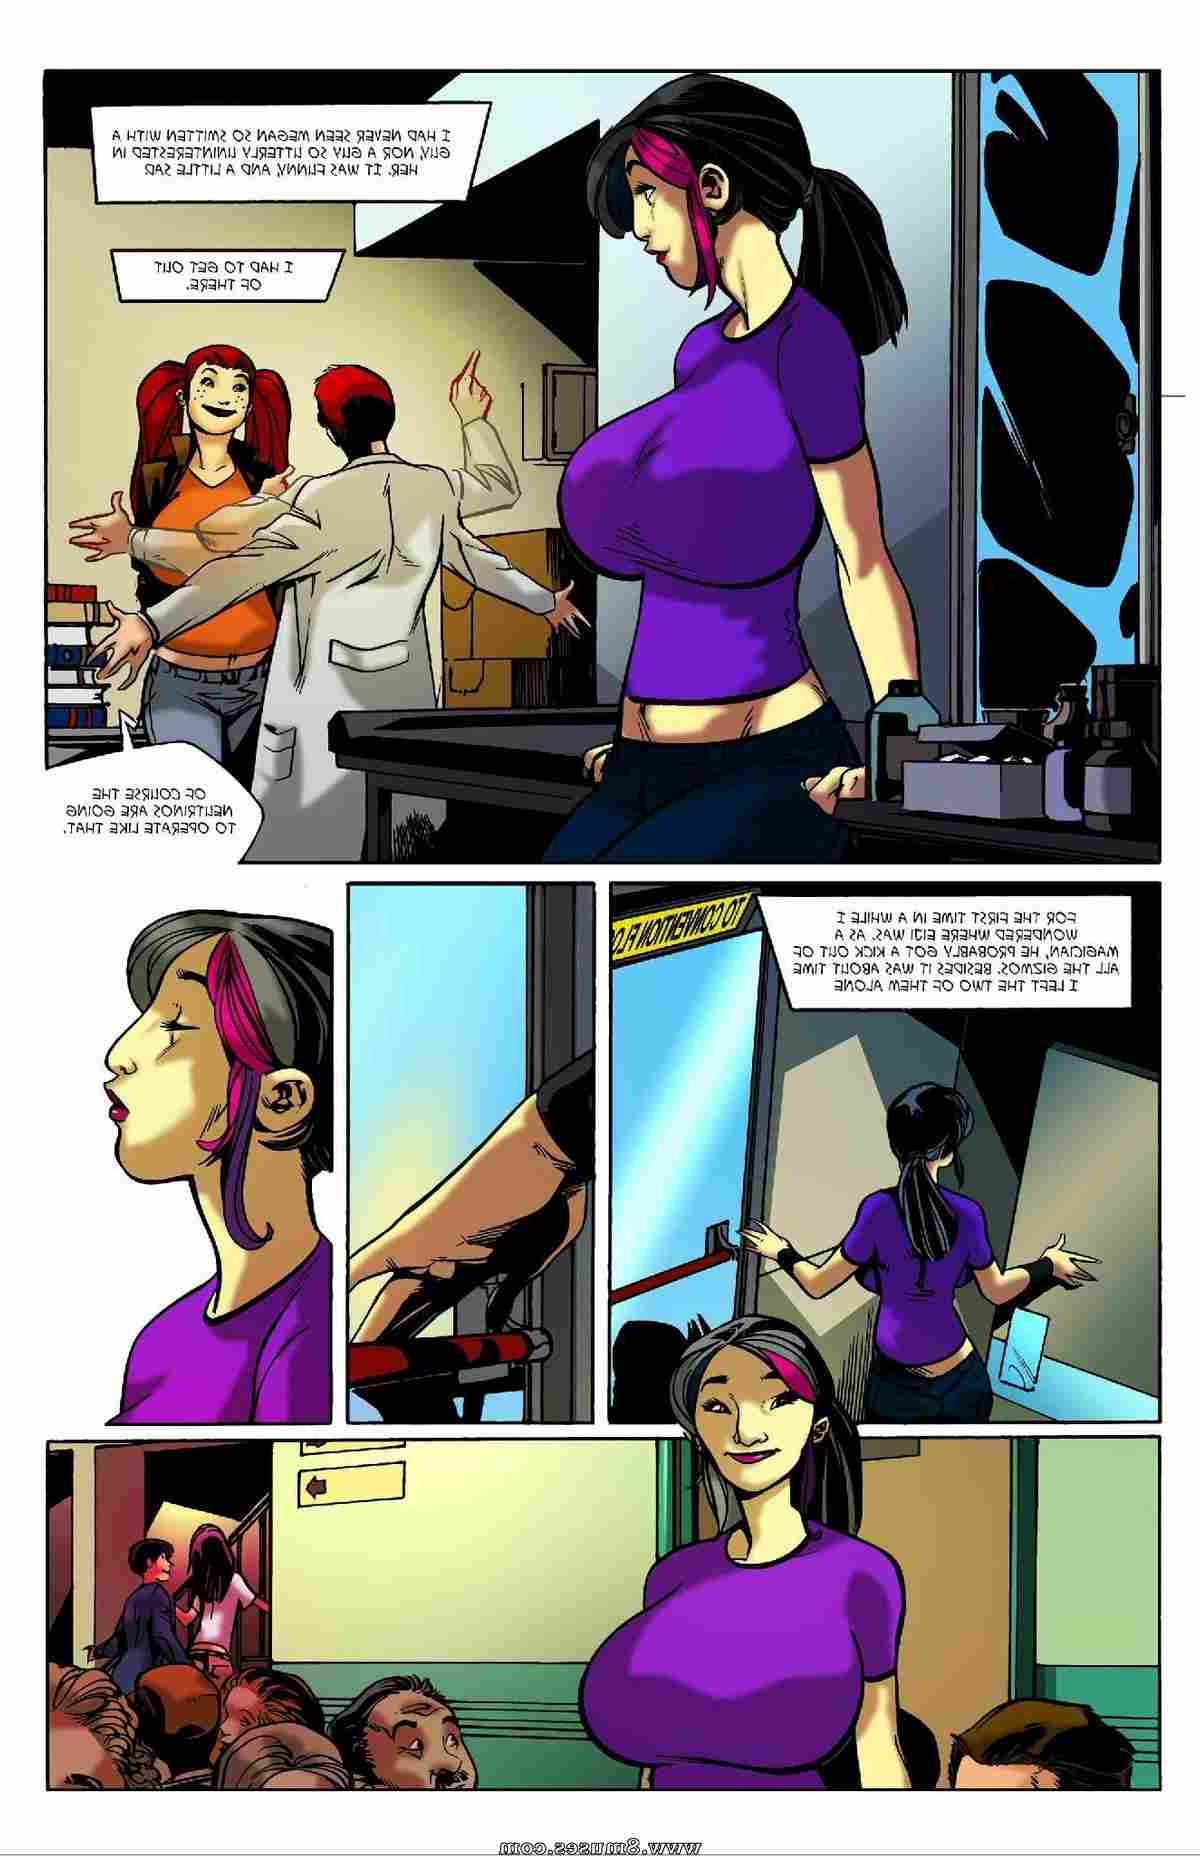 BE-Story-Club-Comics/Changing-and-Growing-in-Las-Vegas Changing_and_Growing_in_Las_Vegas__8muses_-_Sex_and_Porn_Comics_73.jpg